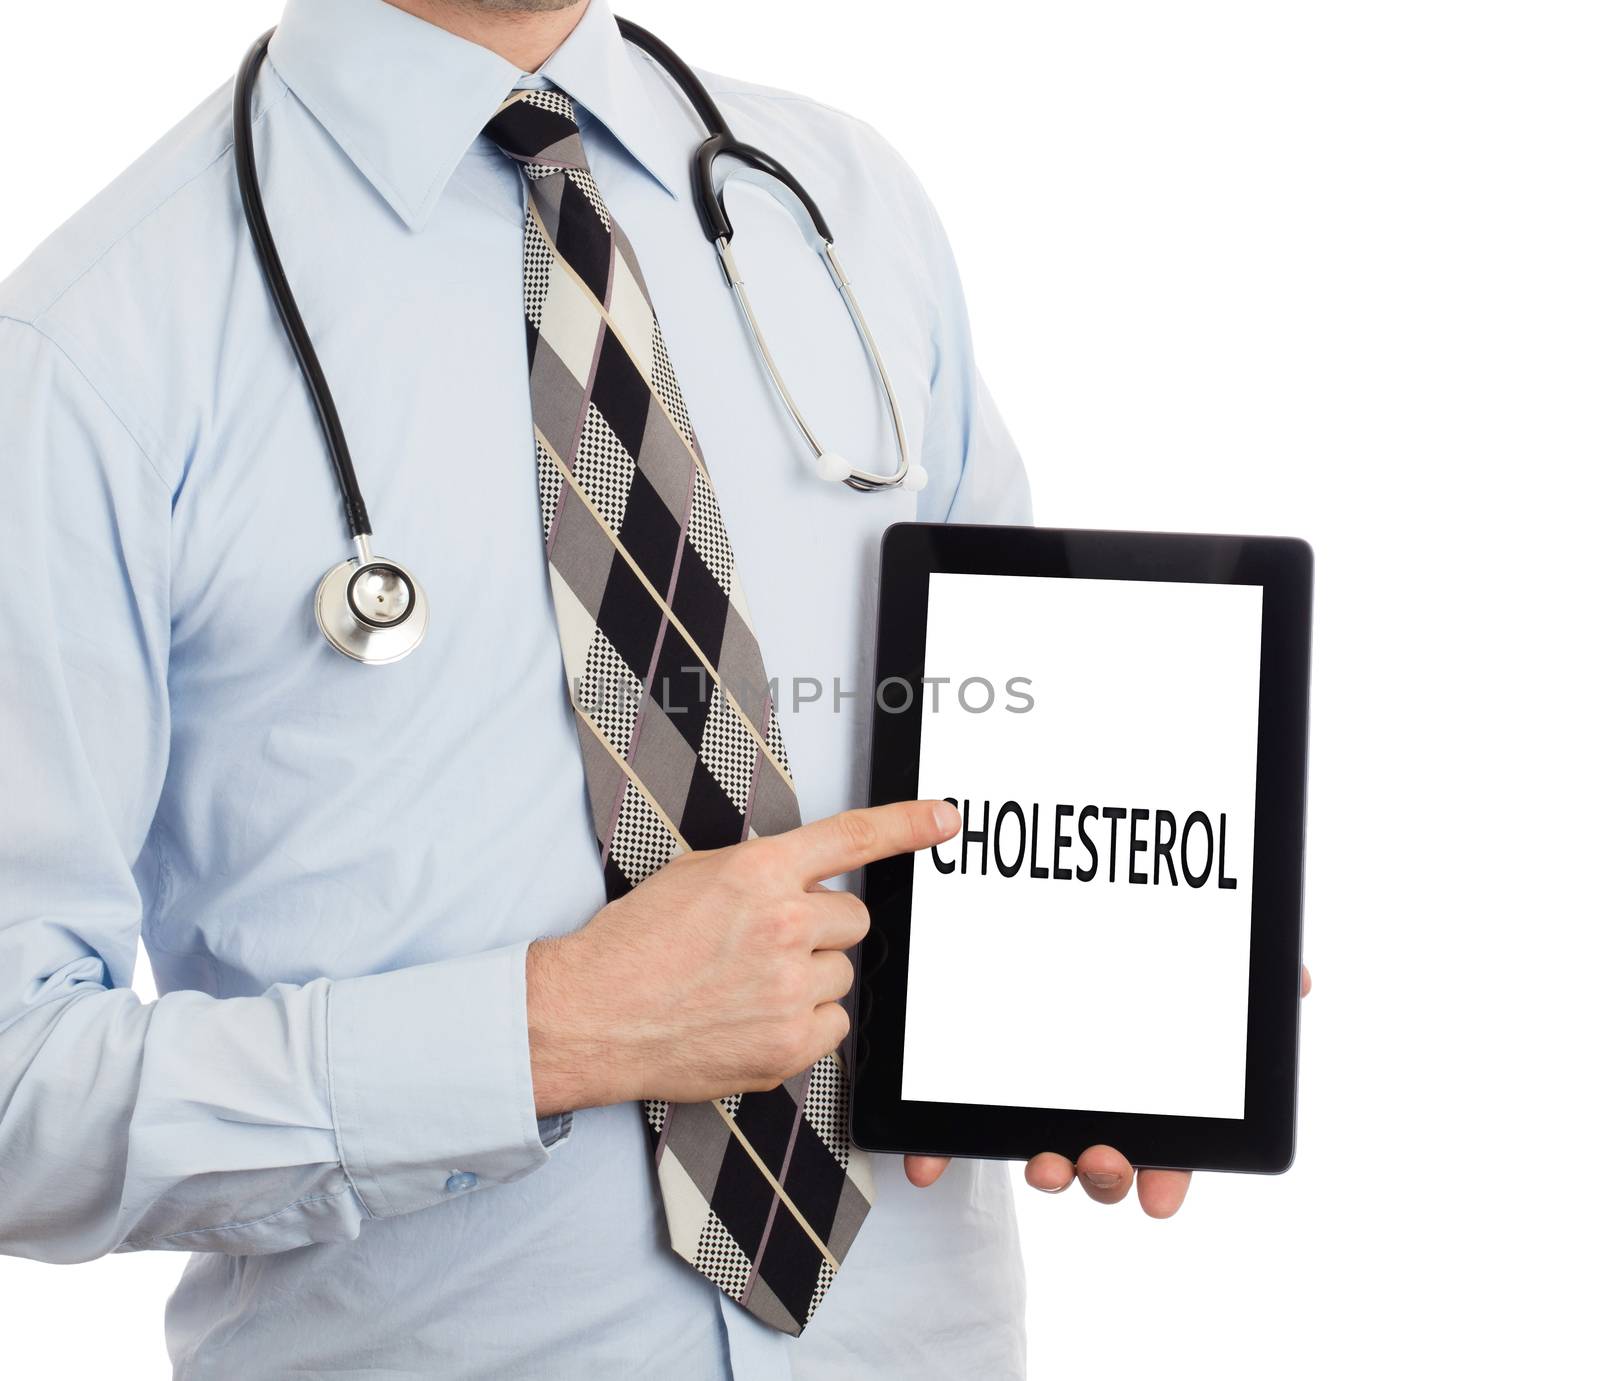 Doctor holding tablet - Cholesterol by michaklootwijk